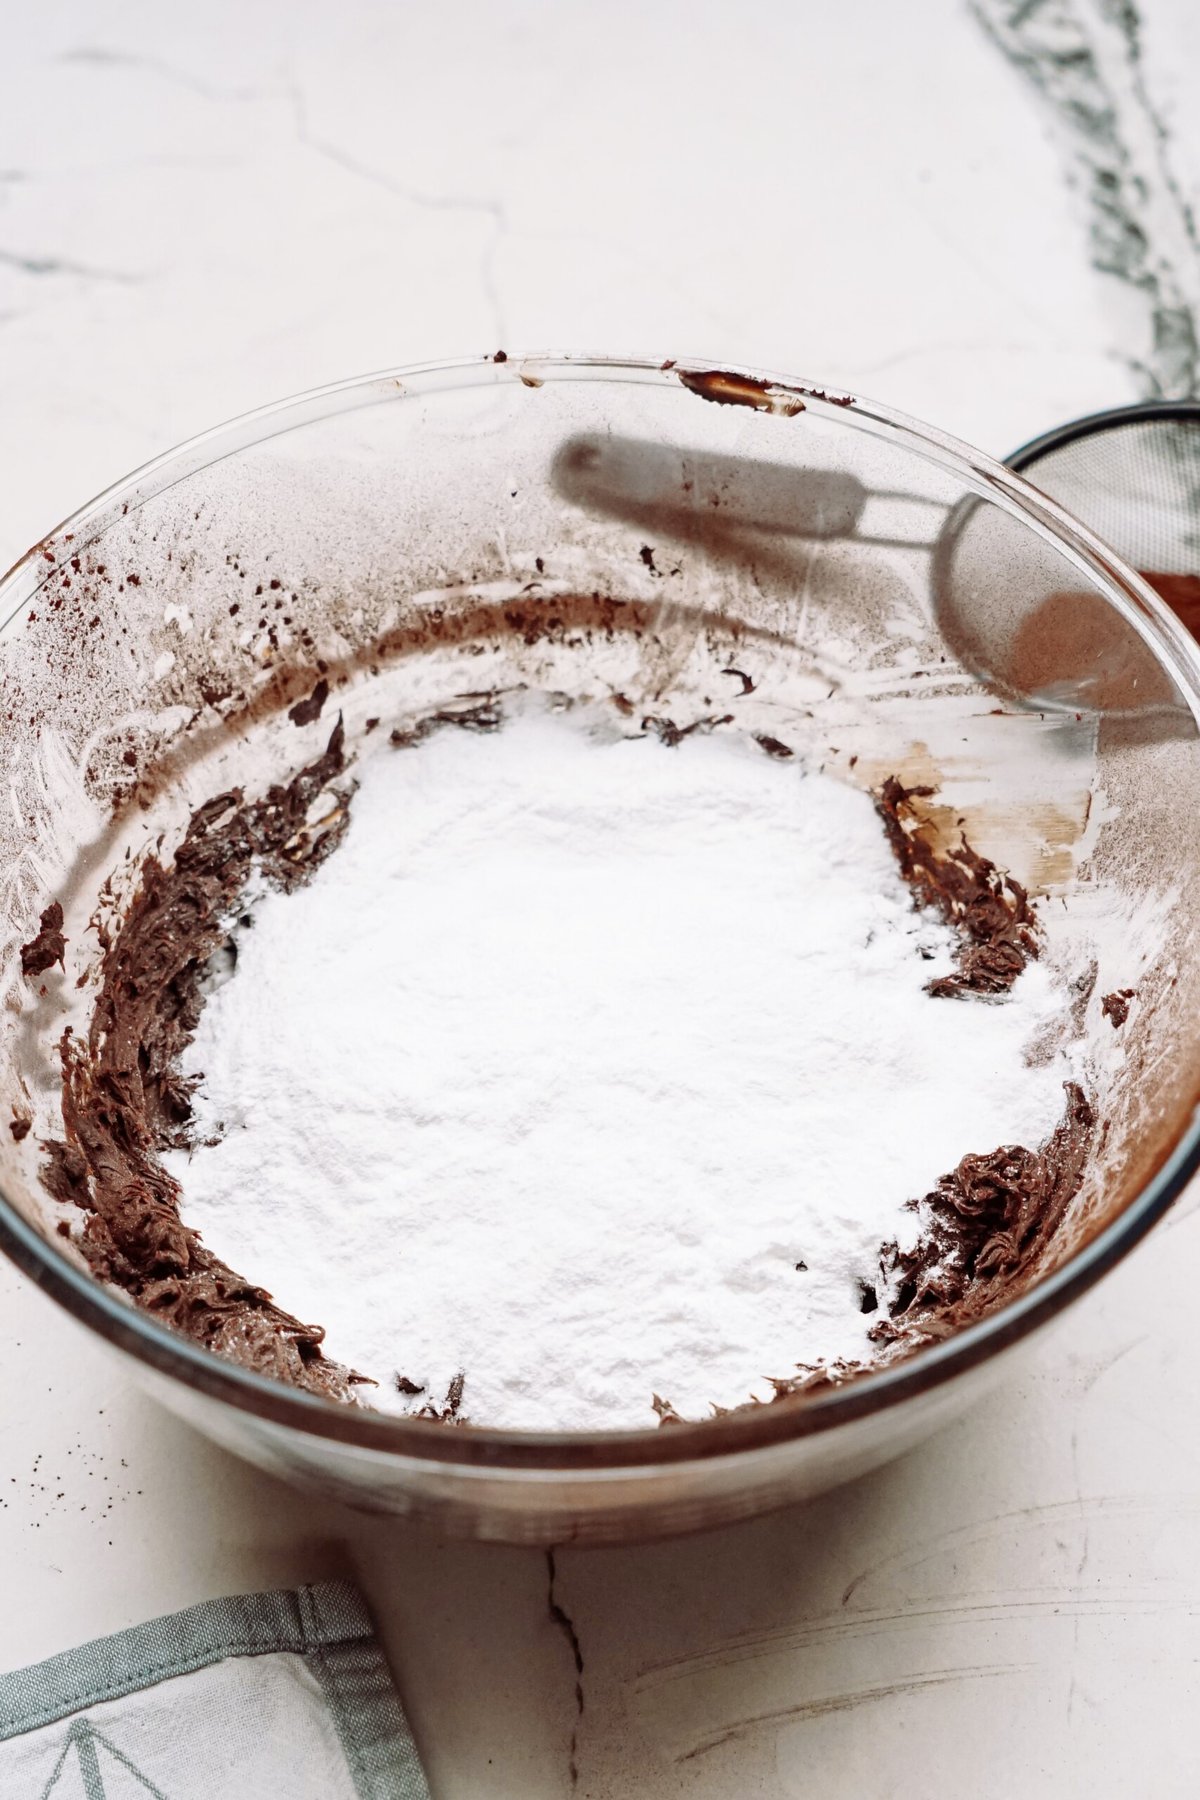 A glass bowl containing chocolate frosting with a layer of powdered sugar on top.